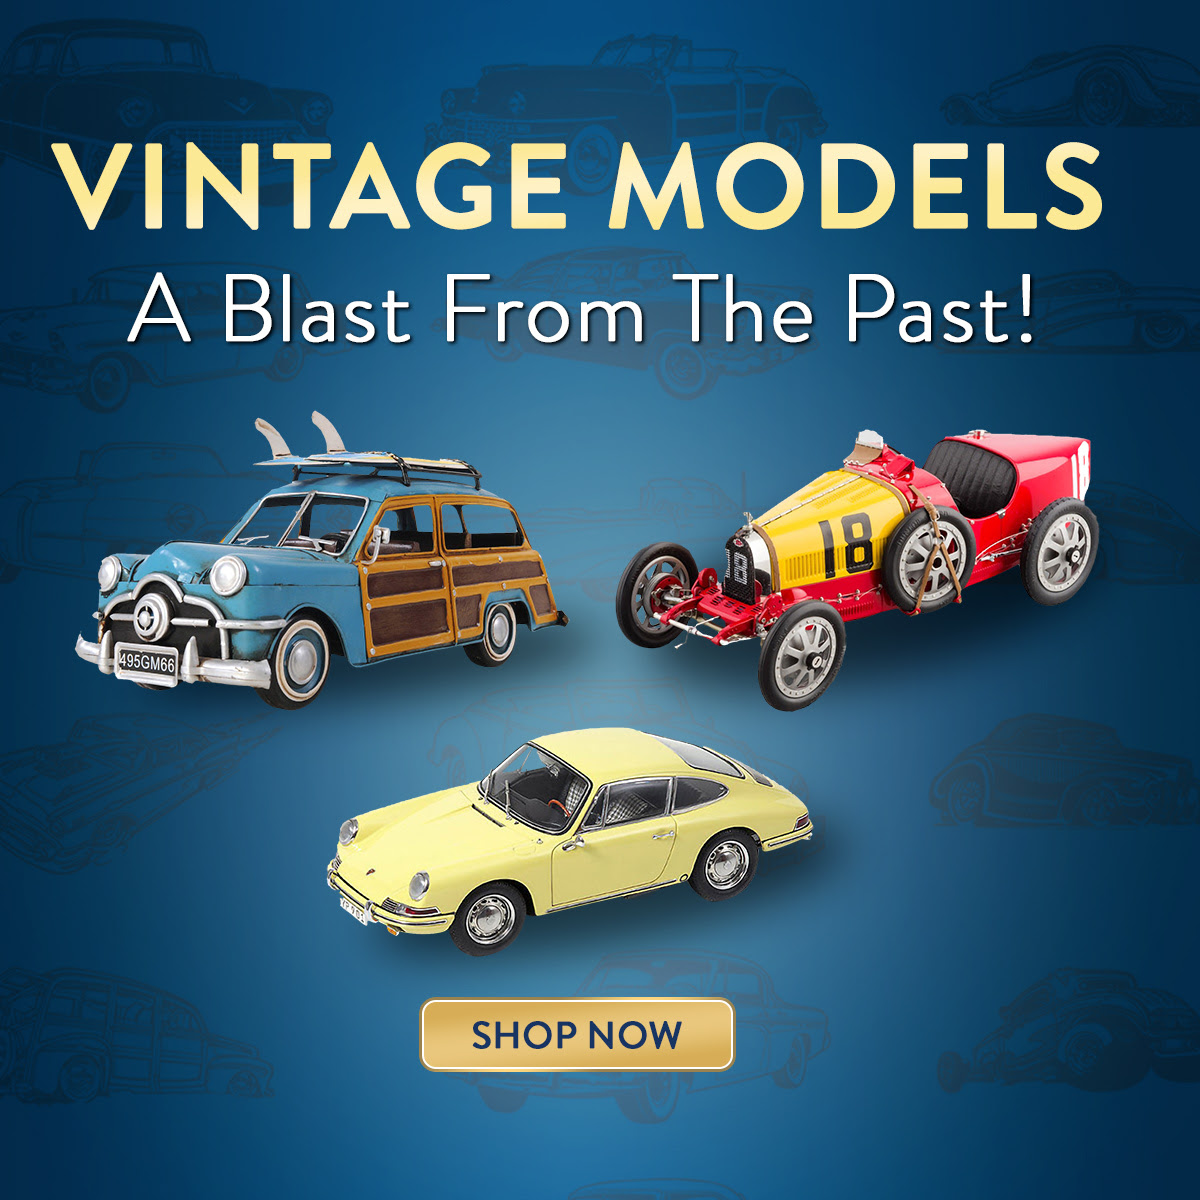 Vintage Models - A blast from the past! Shop Now.